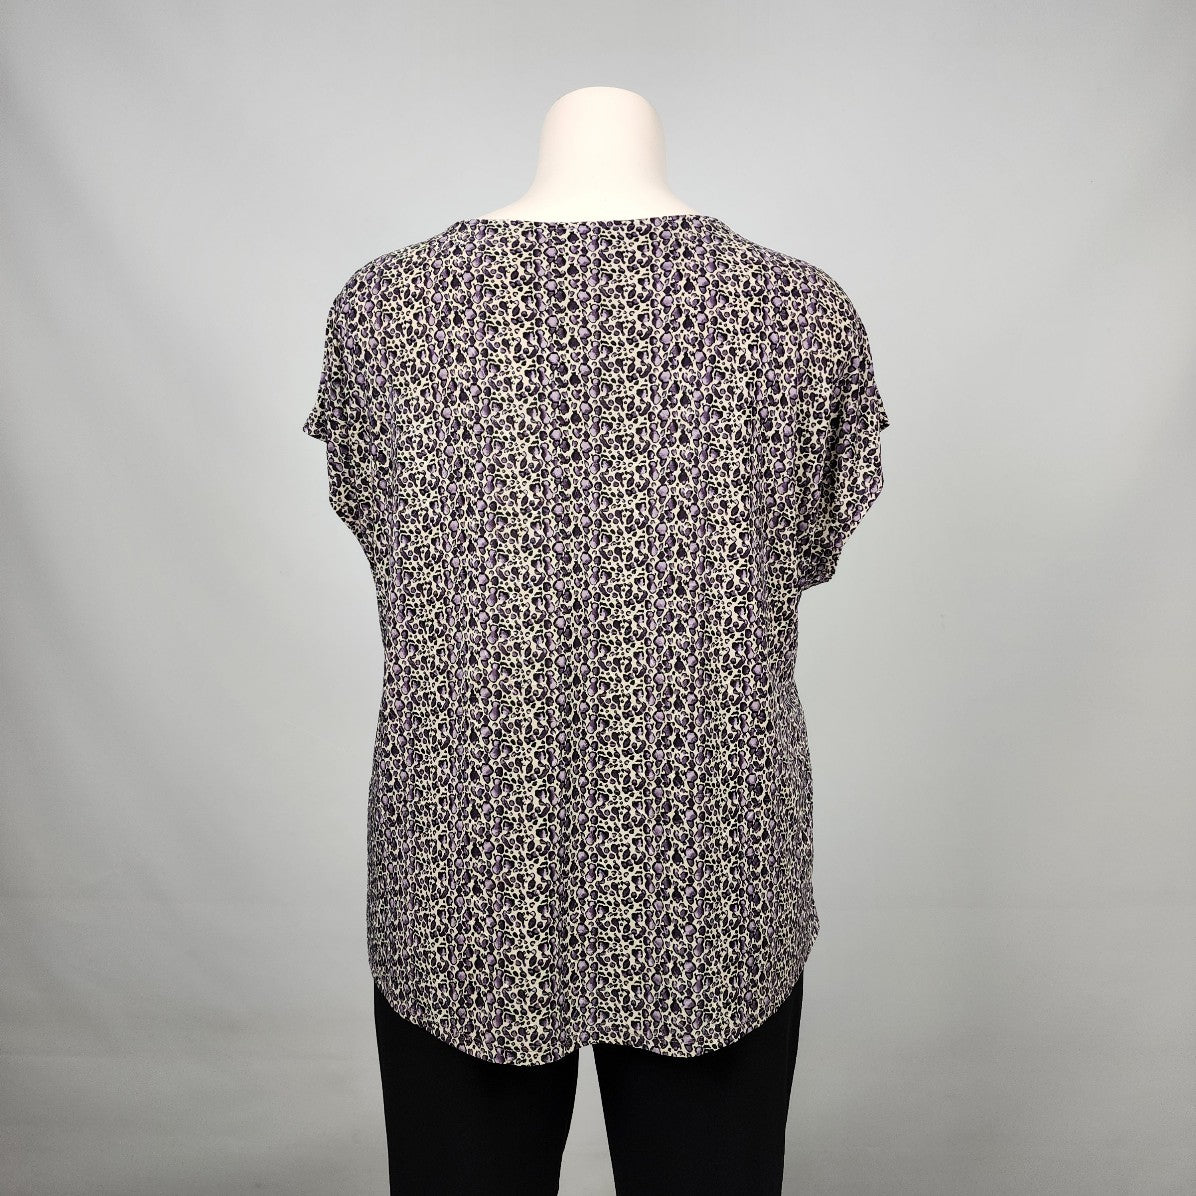 Laura Purple Printed Top Size 3X